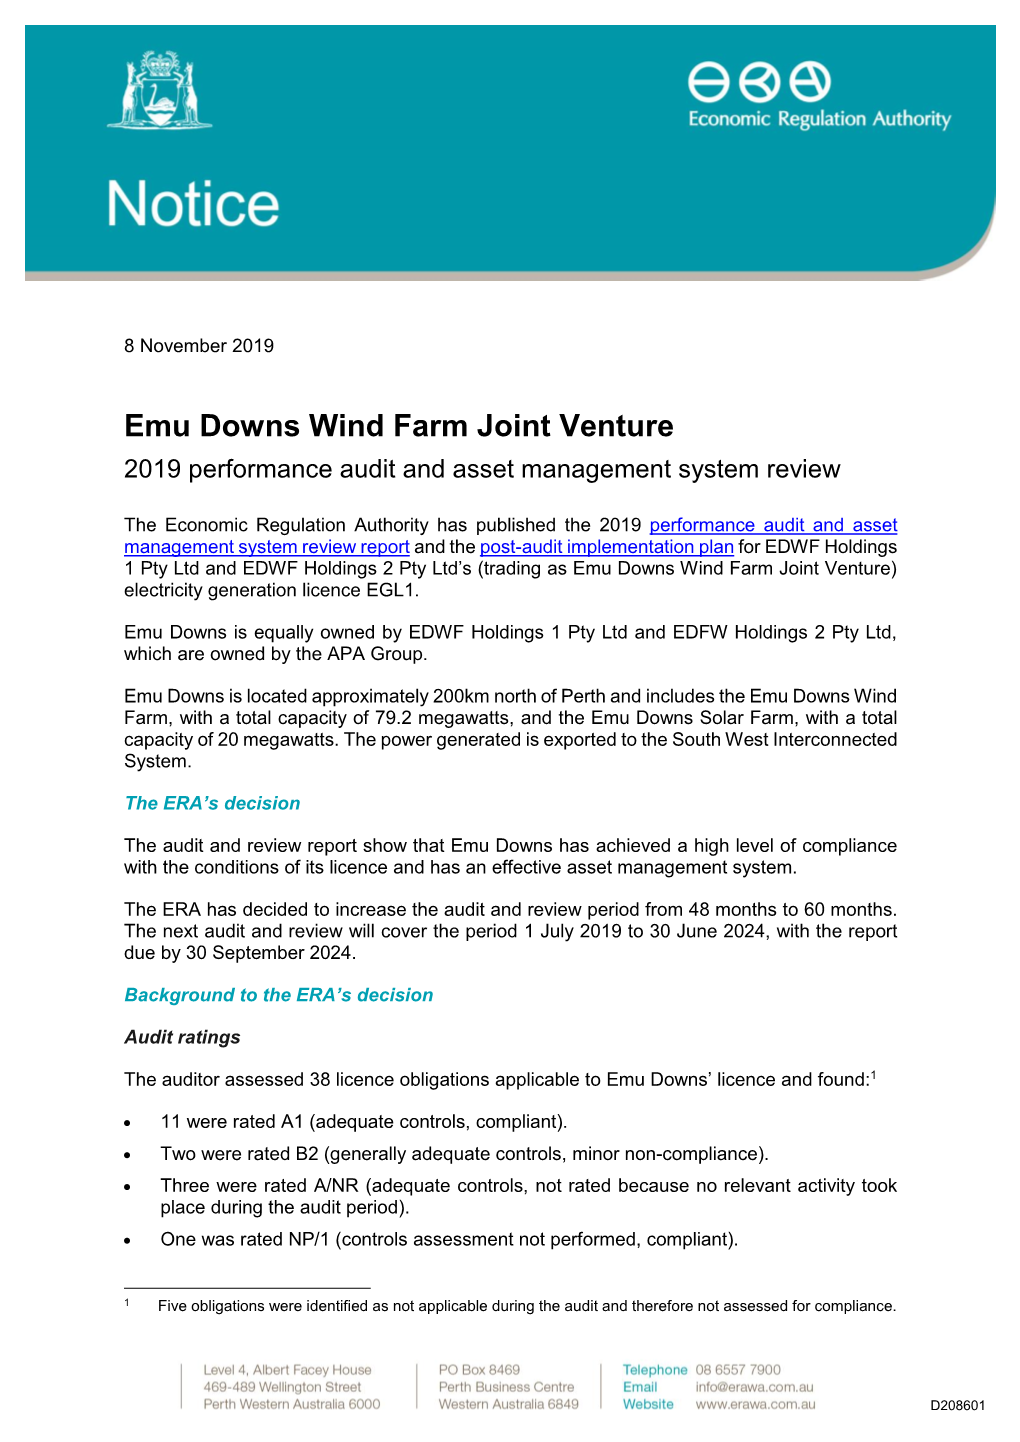 Emu Downs Wind Farm Joint Venture 2019 Performance Audit and Asset Management System Review